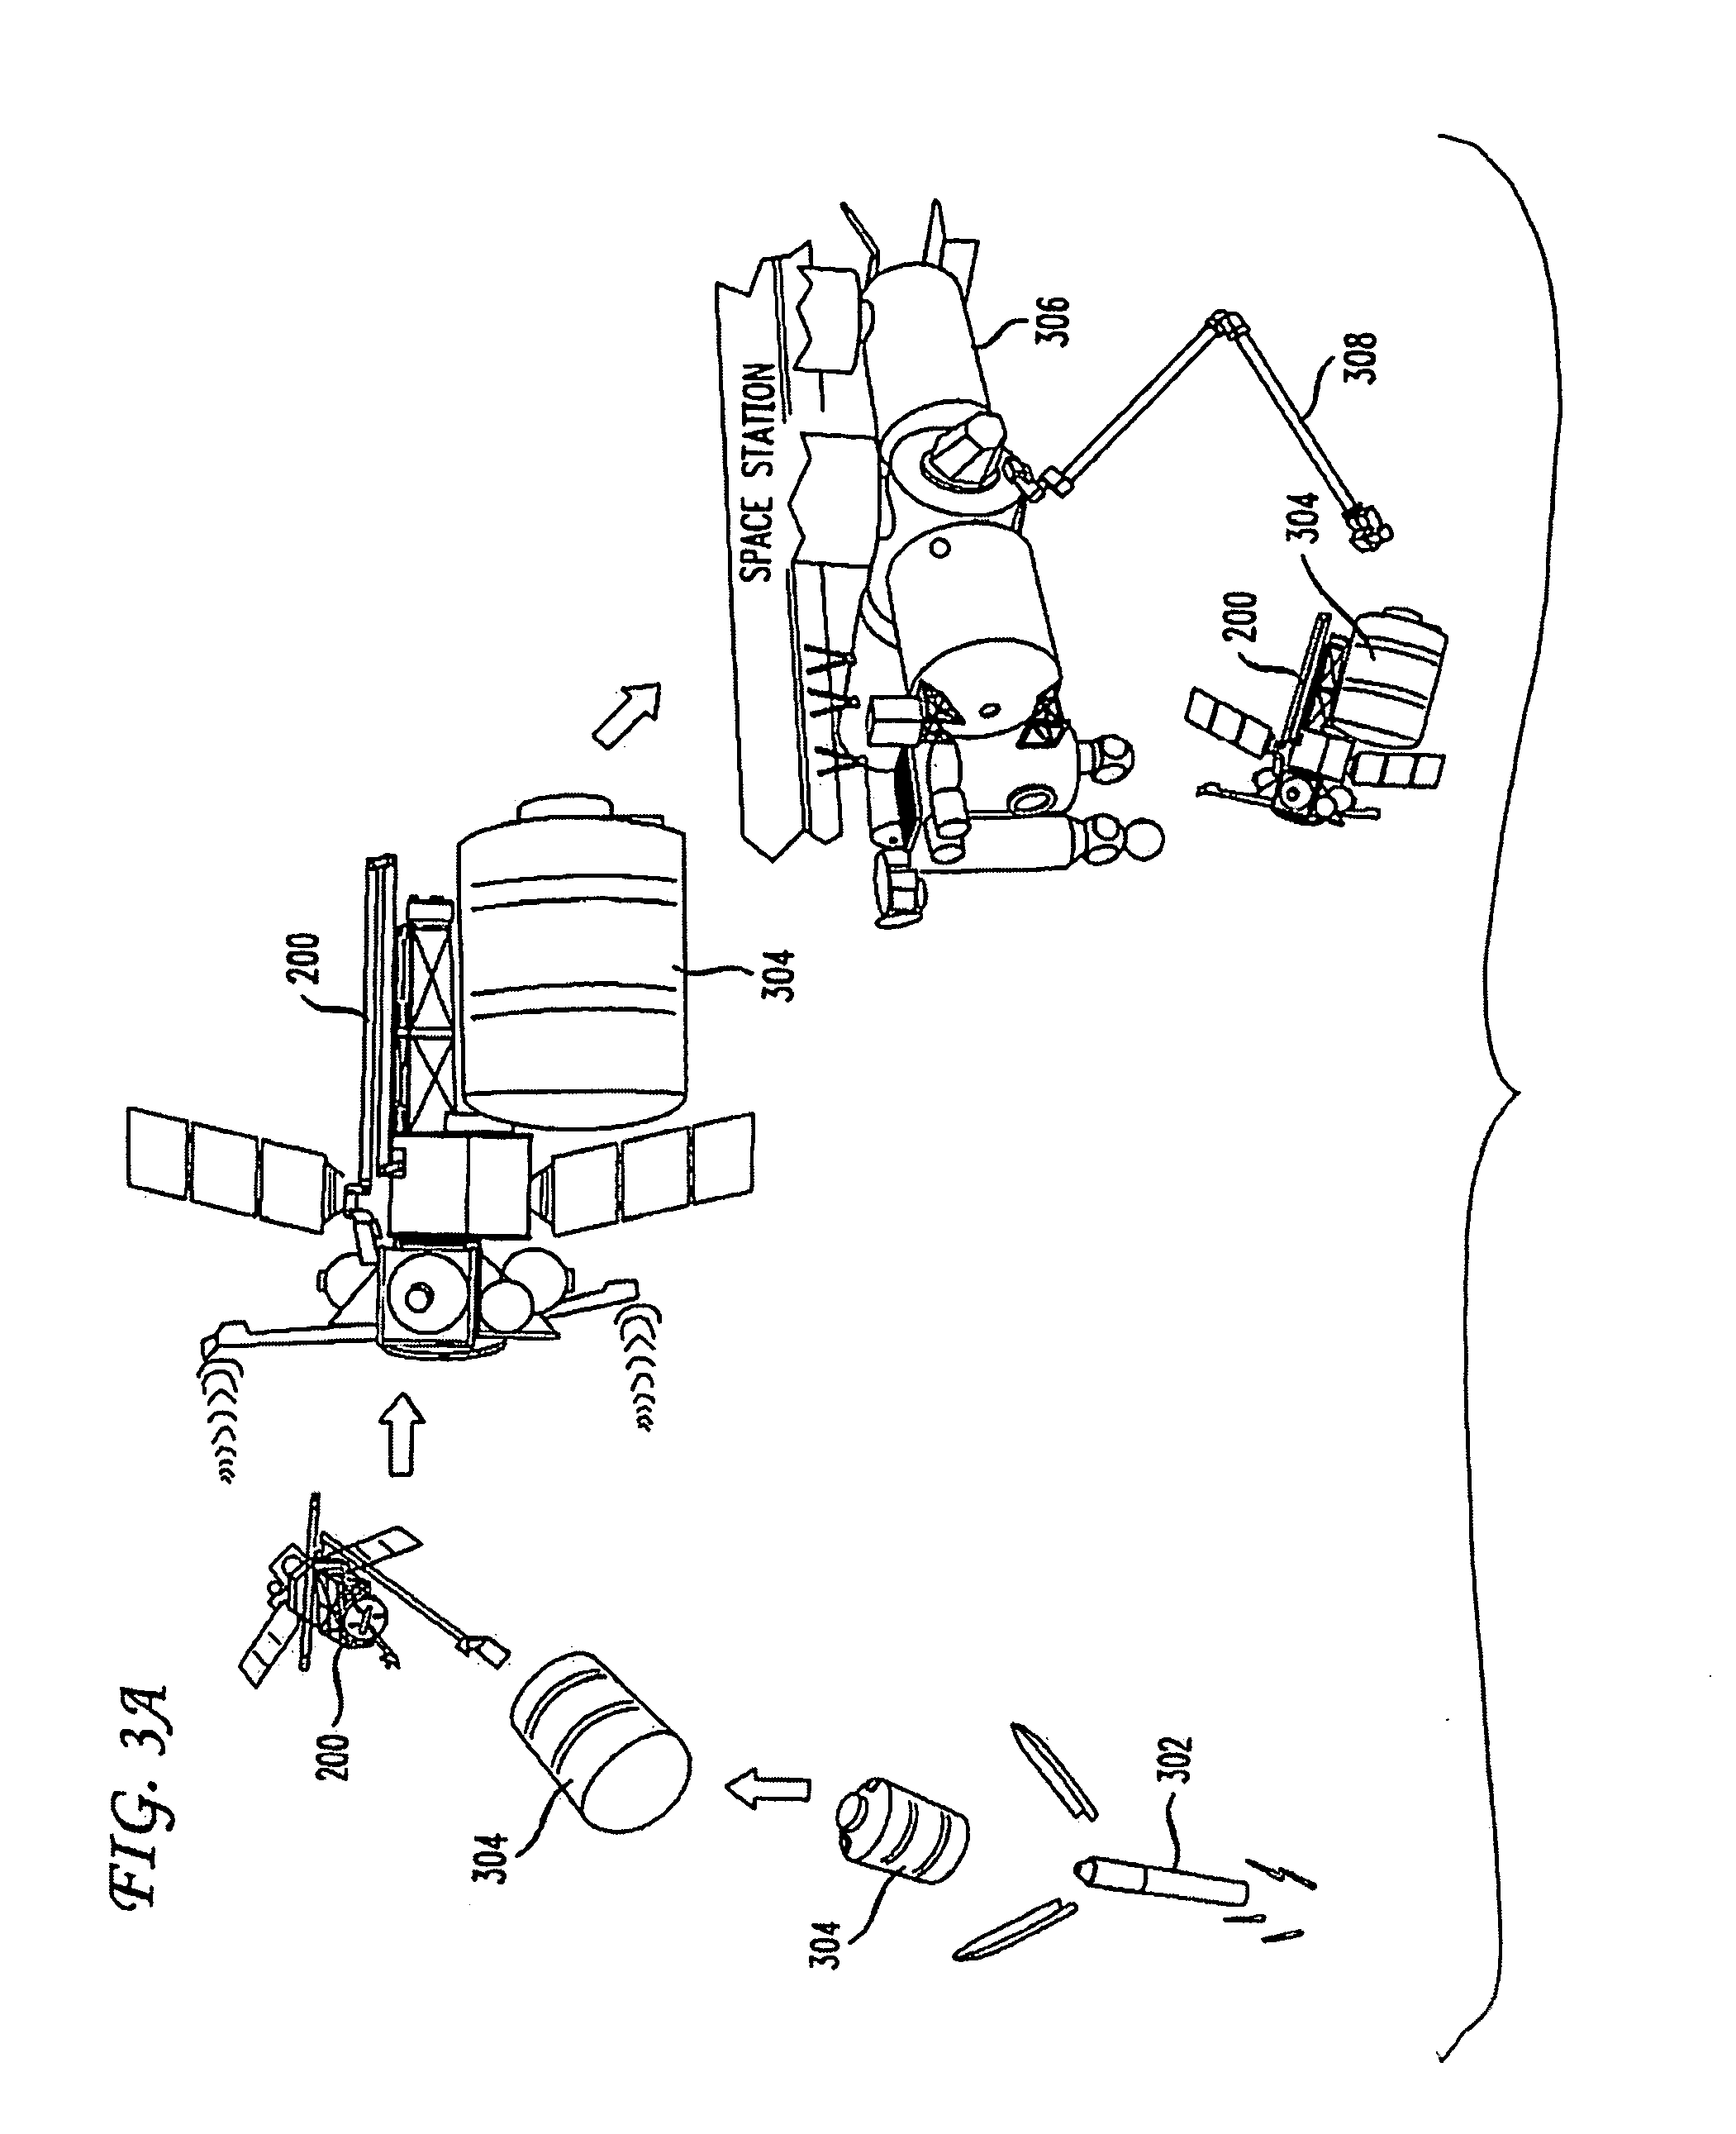 System and method for transferring cargo containers in space